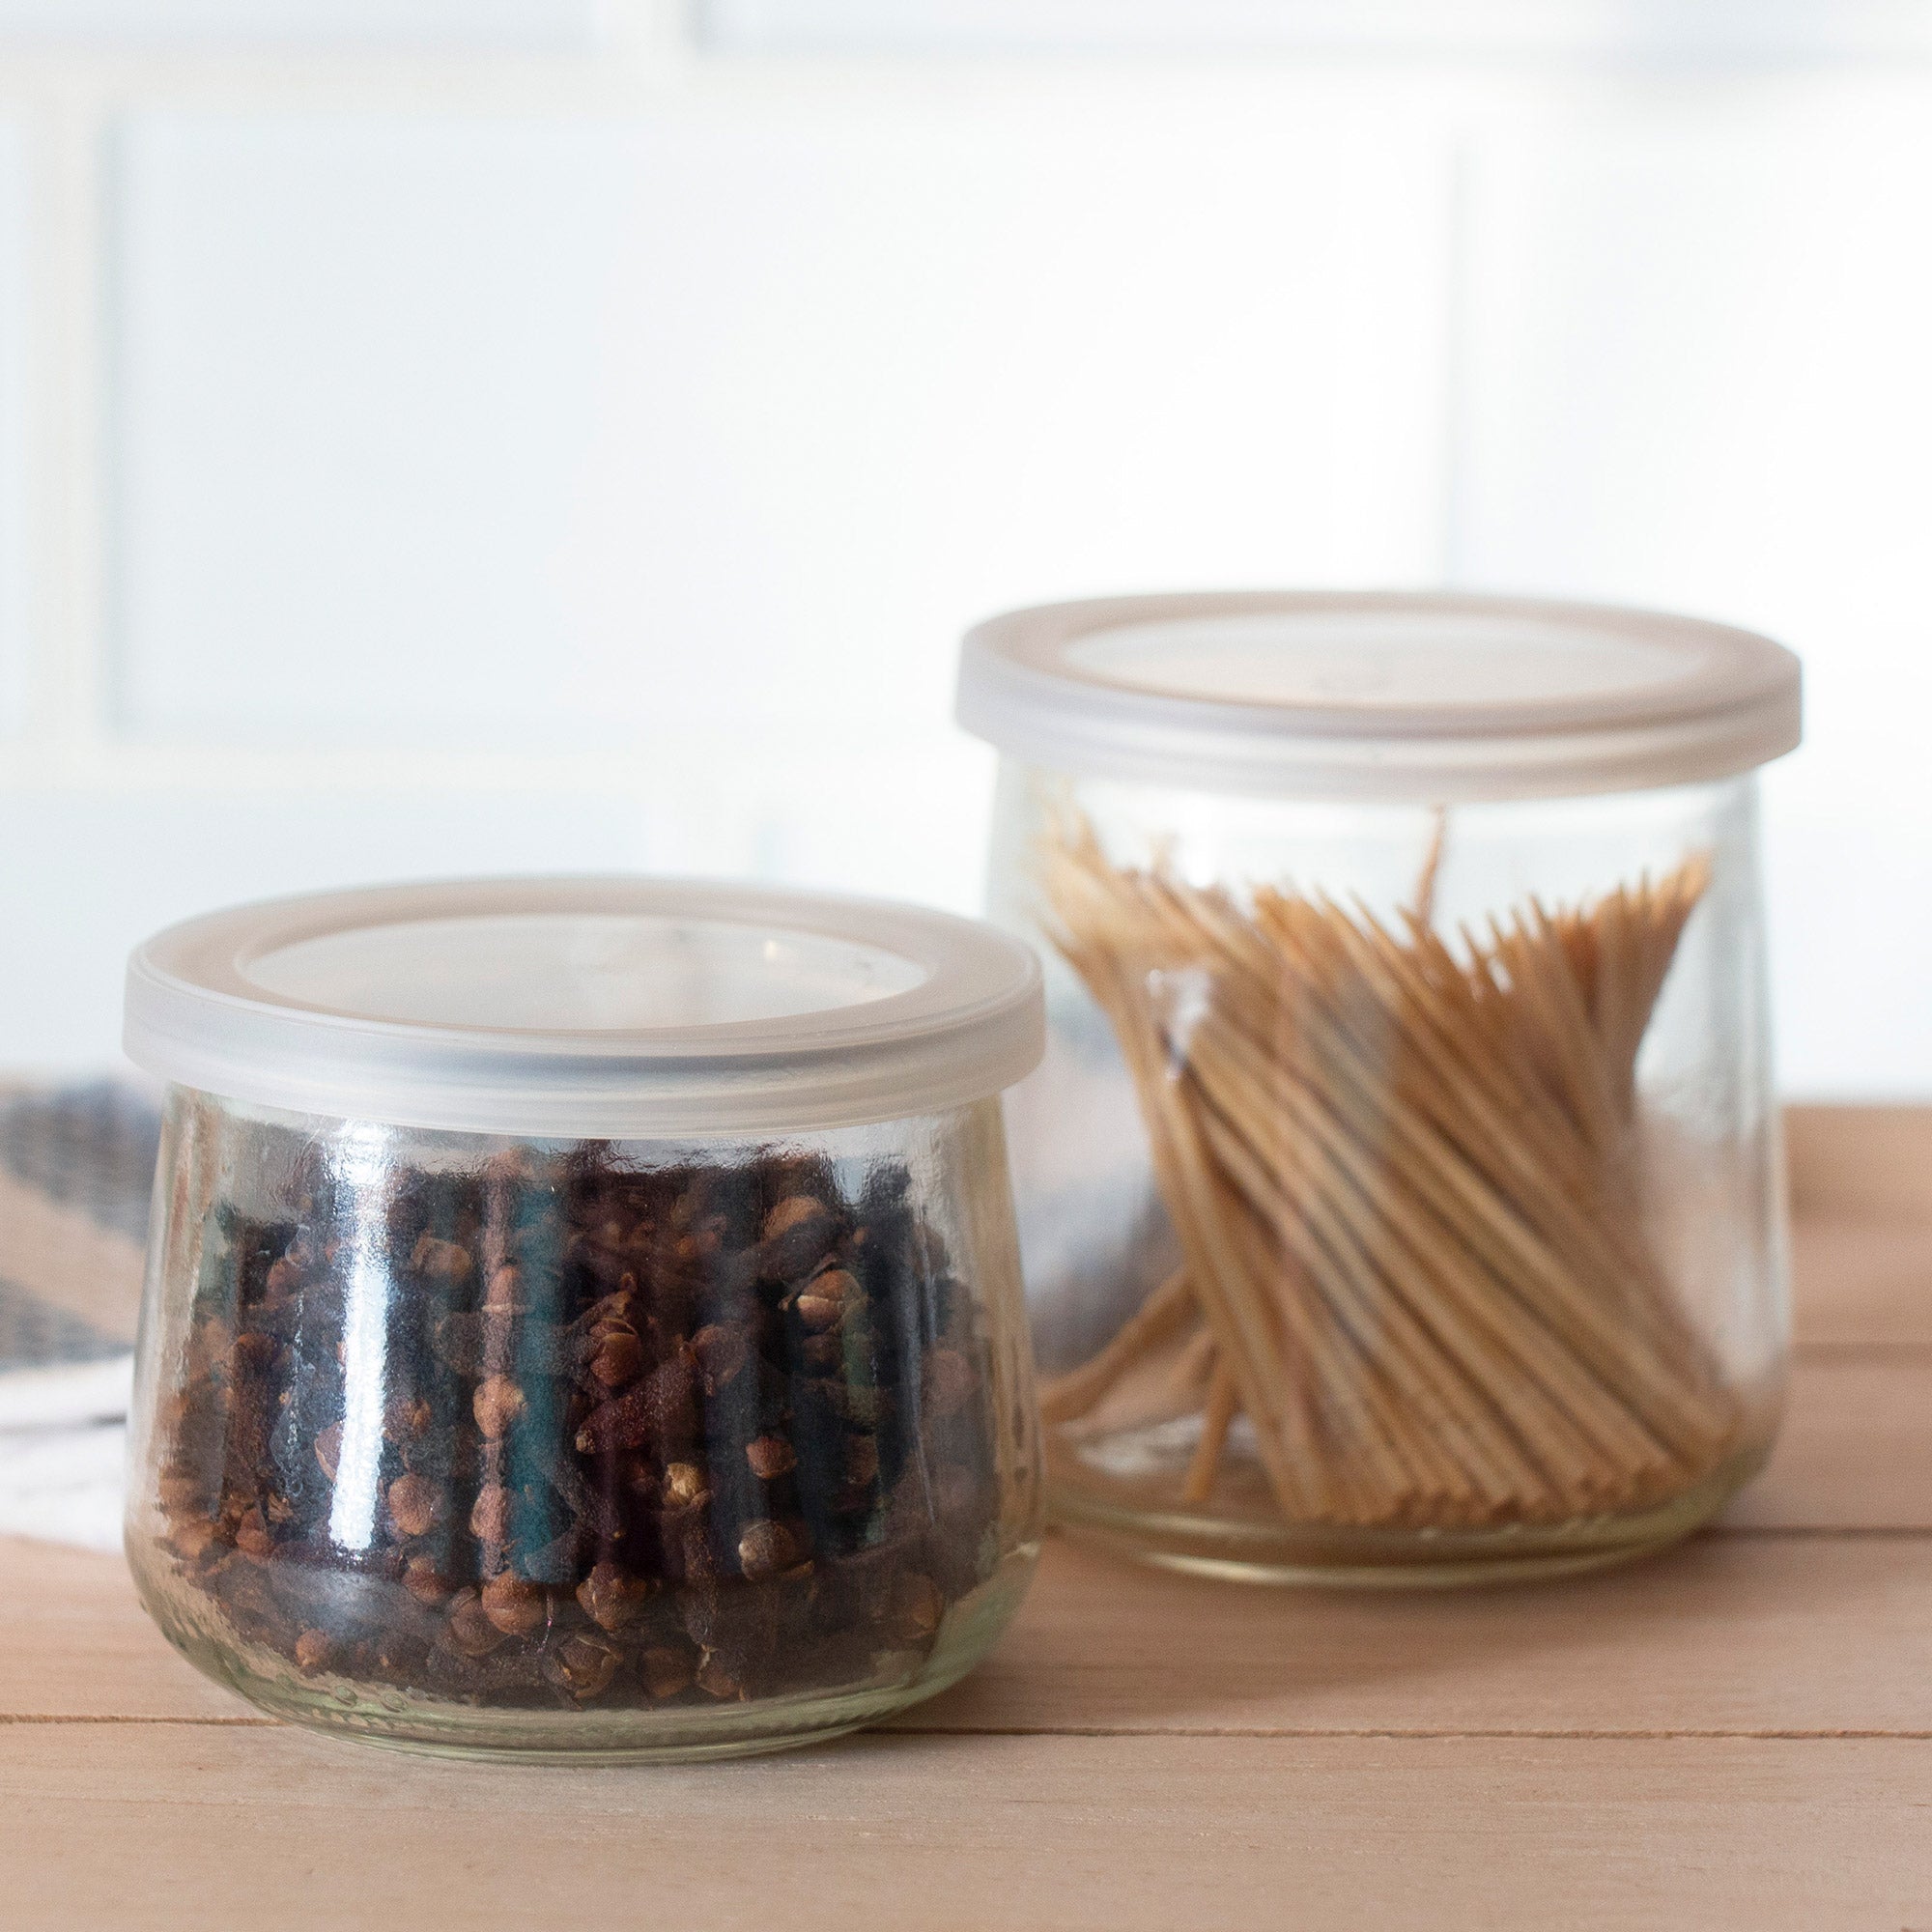 Turn Your Oui Yogurt Jars Into Storage Containers with These